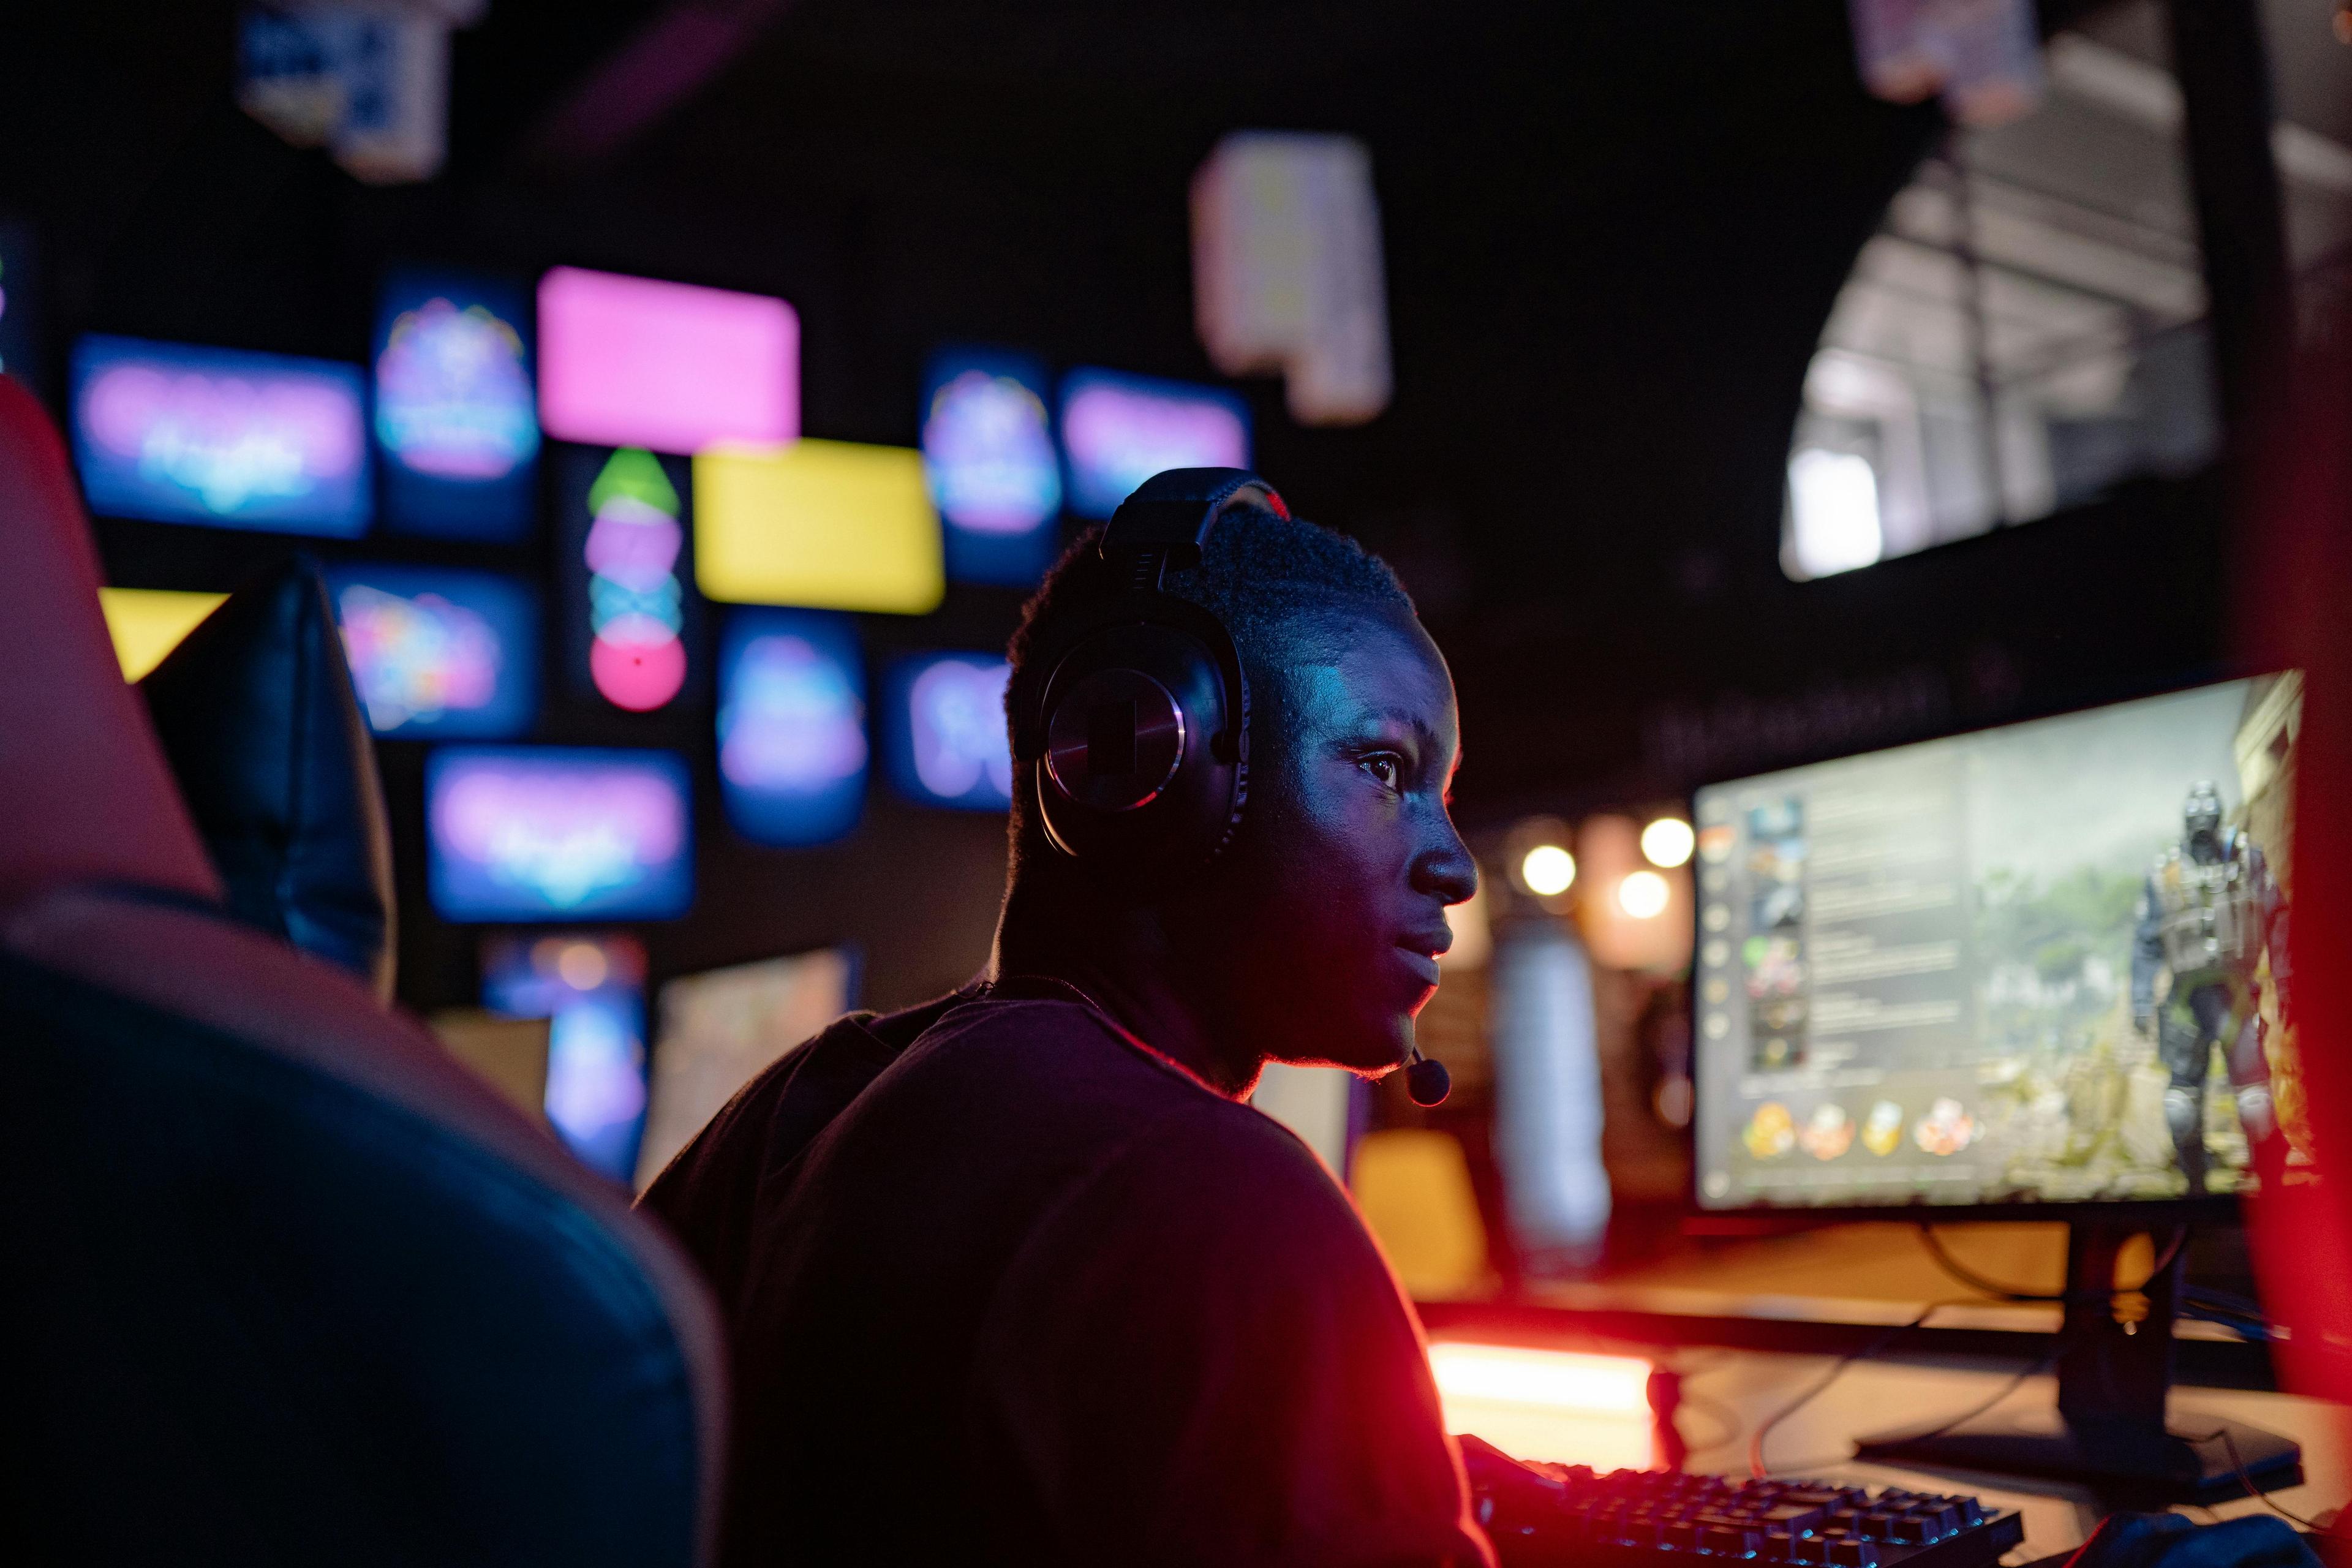 young man wearing a headset is sitting in front of a PC game featuring an armored player